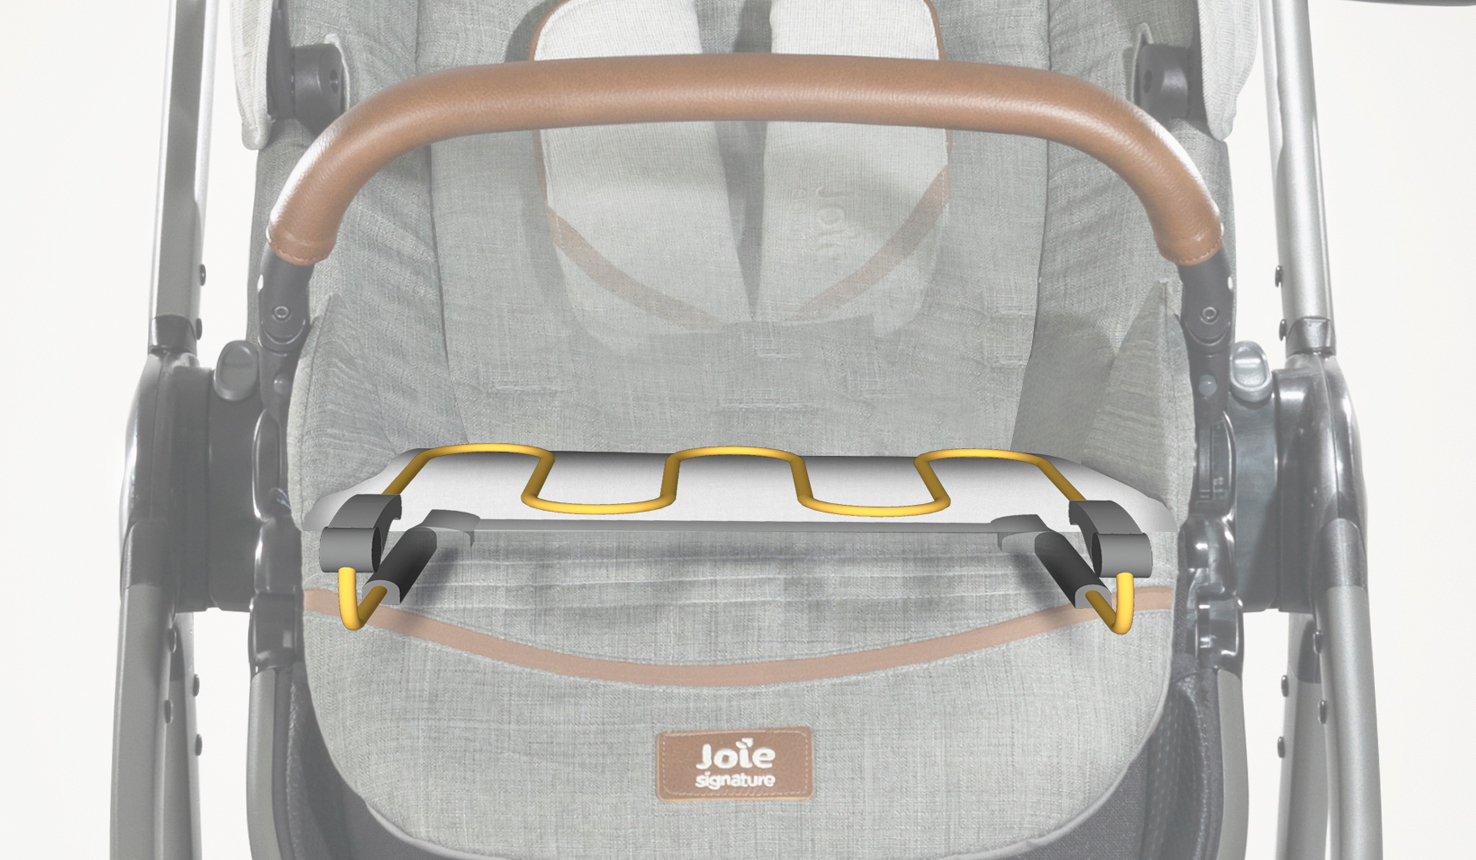 Closeup on the Joie Signature Finiti pram seat with a cutout showing the Flex comfort in seat suspension spring. 